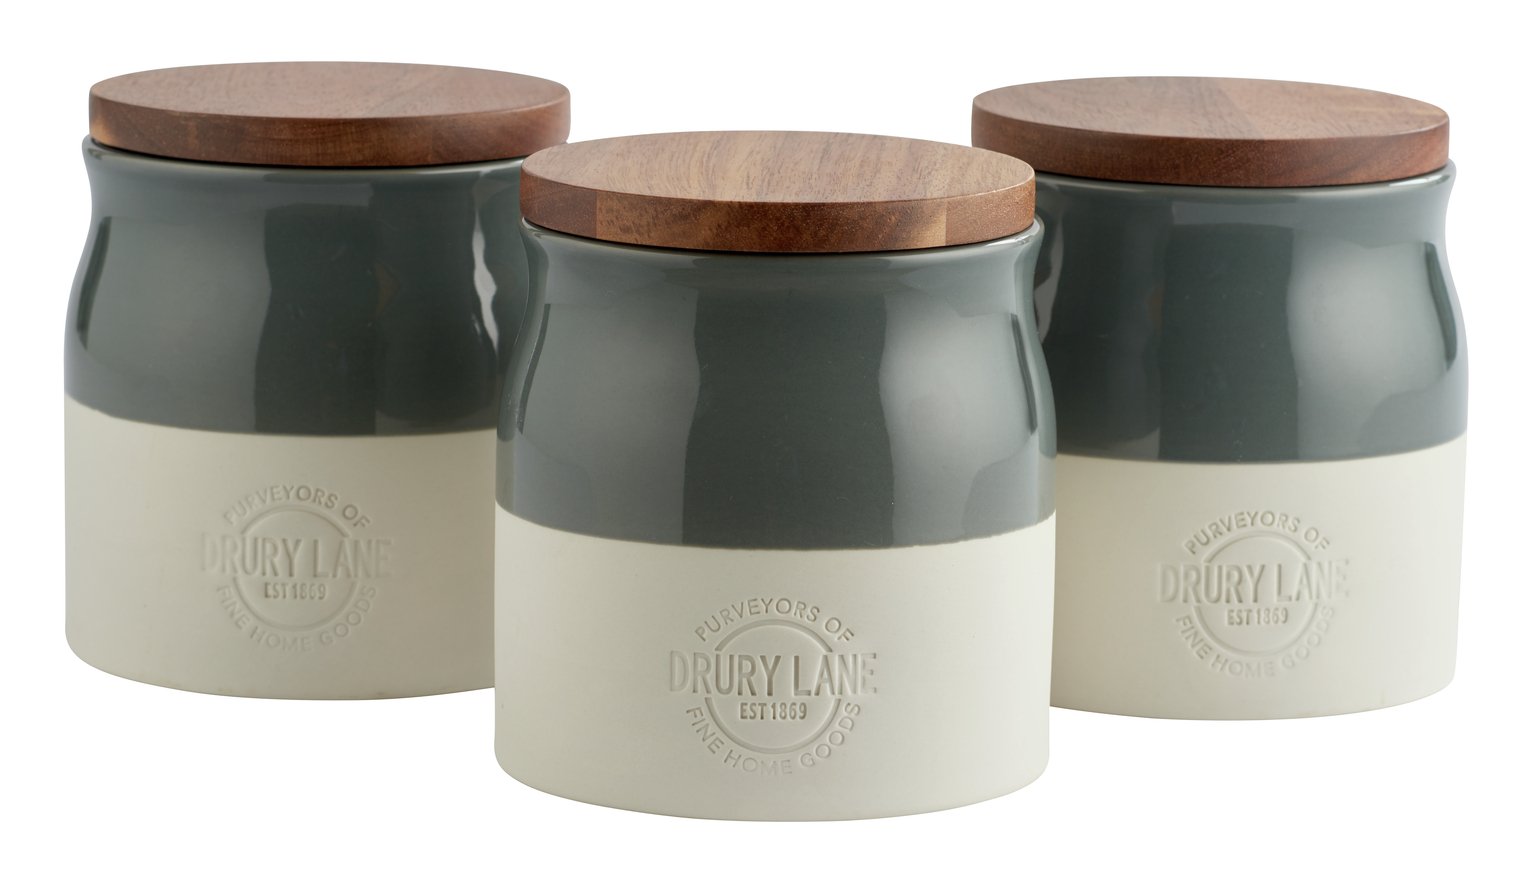 Argos Home Drury Lane Set of 3 Storage Canisters review